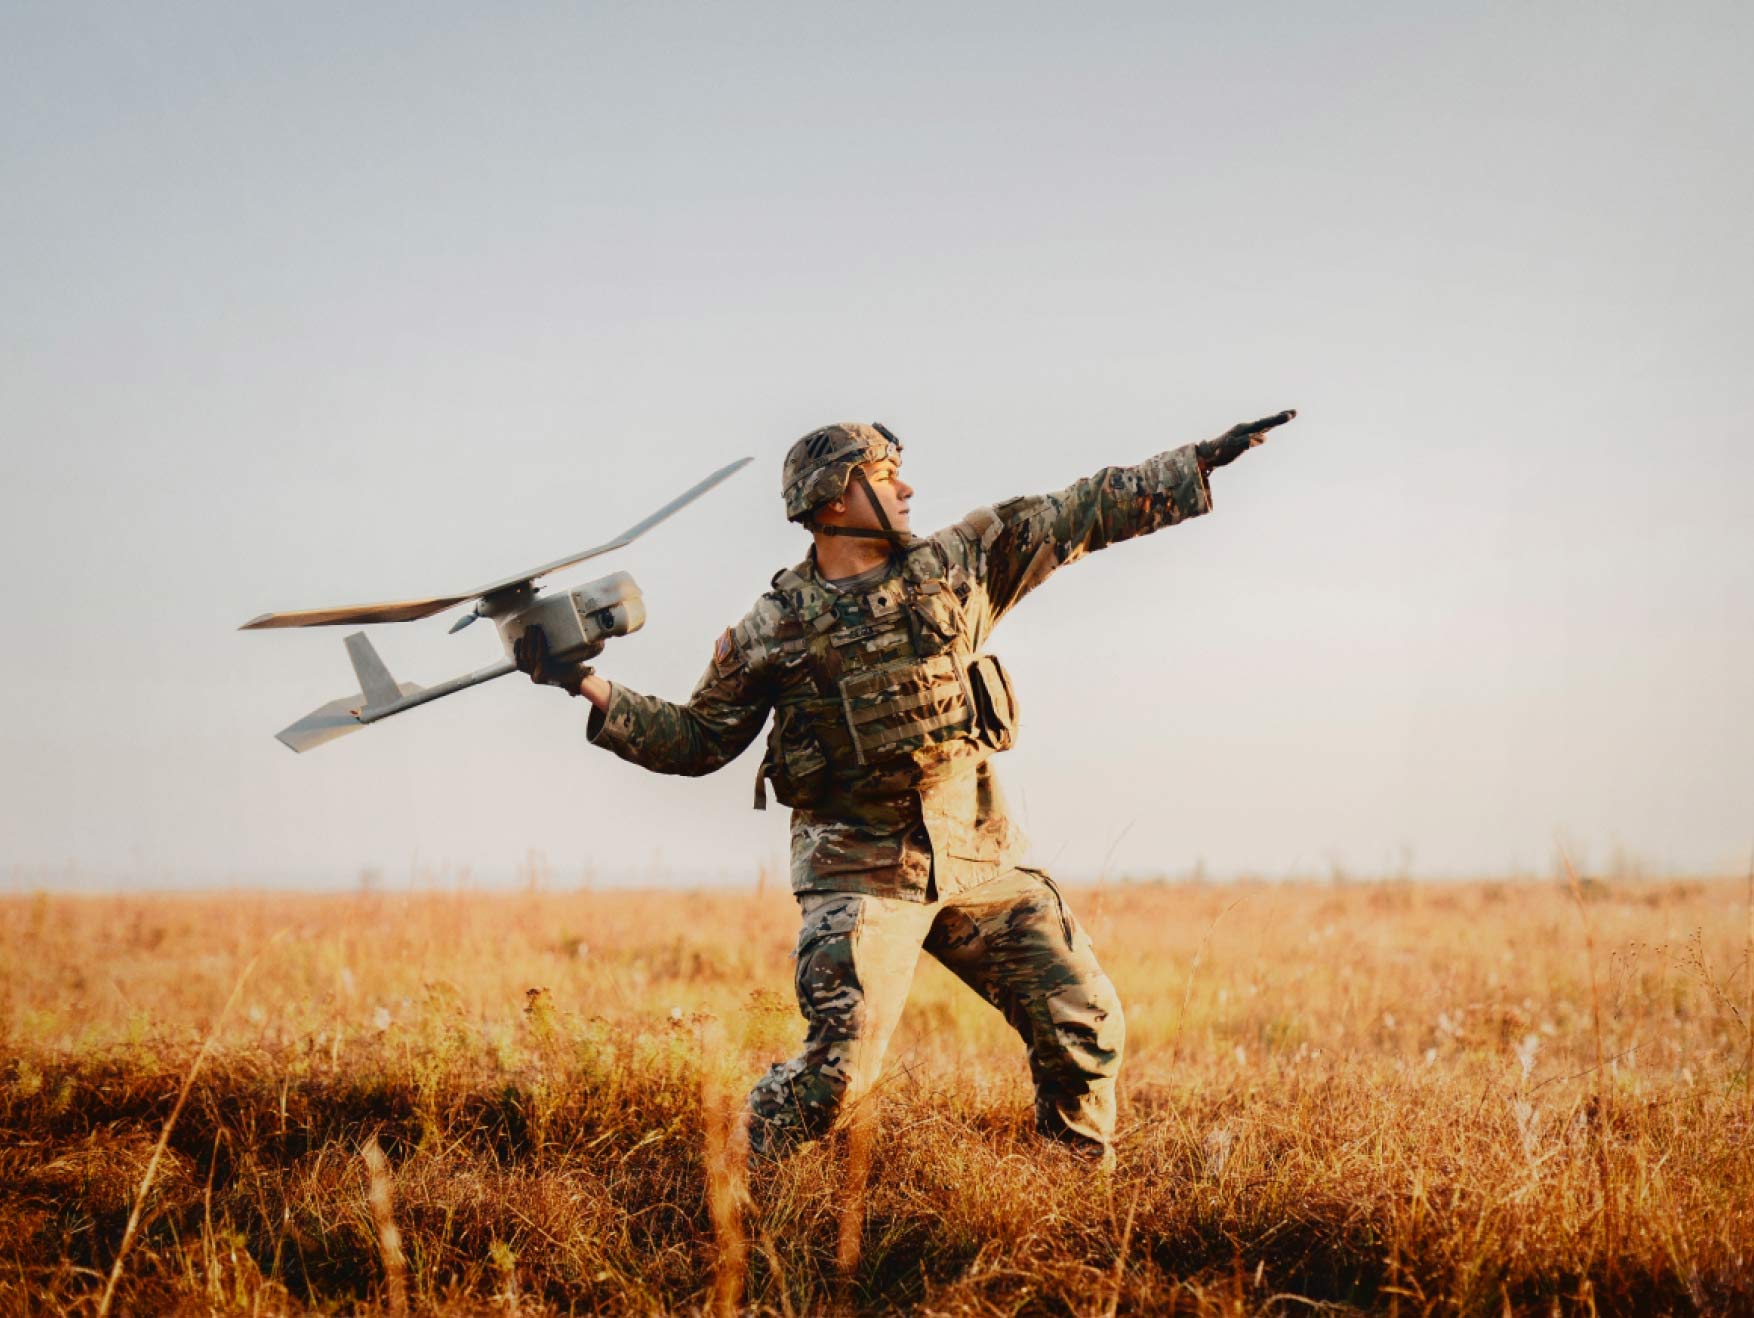 An Army Soldier in combat gear launching a drone in a field